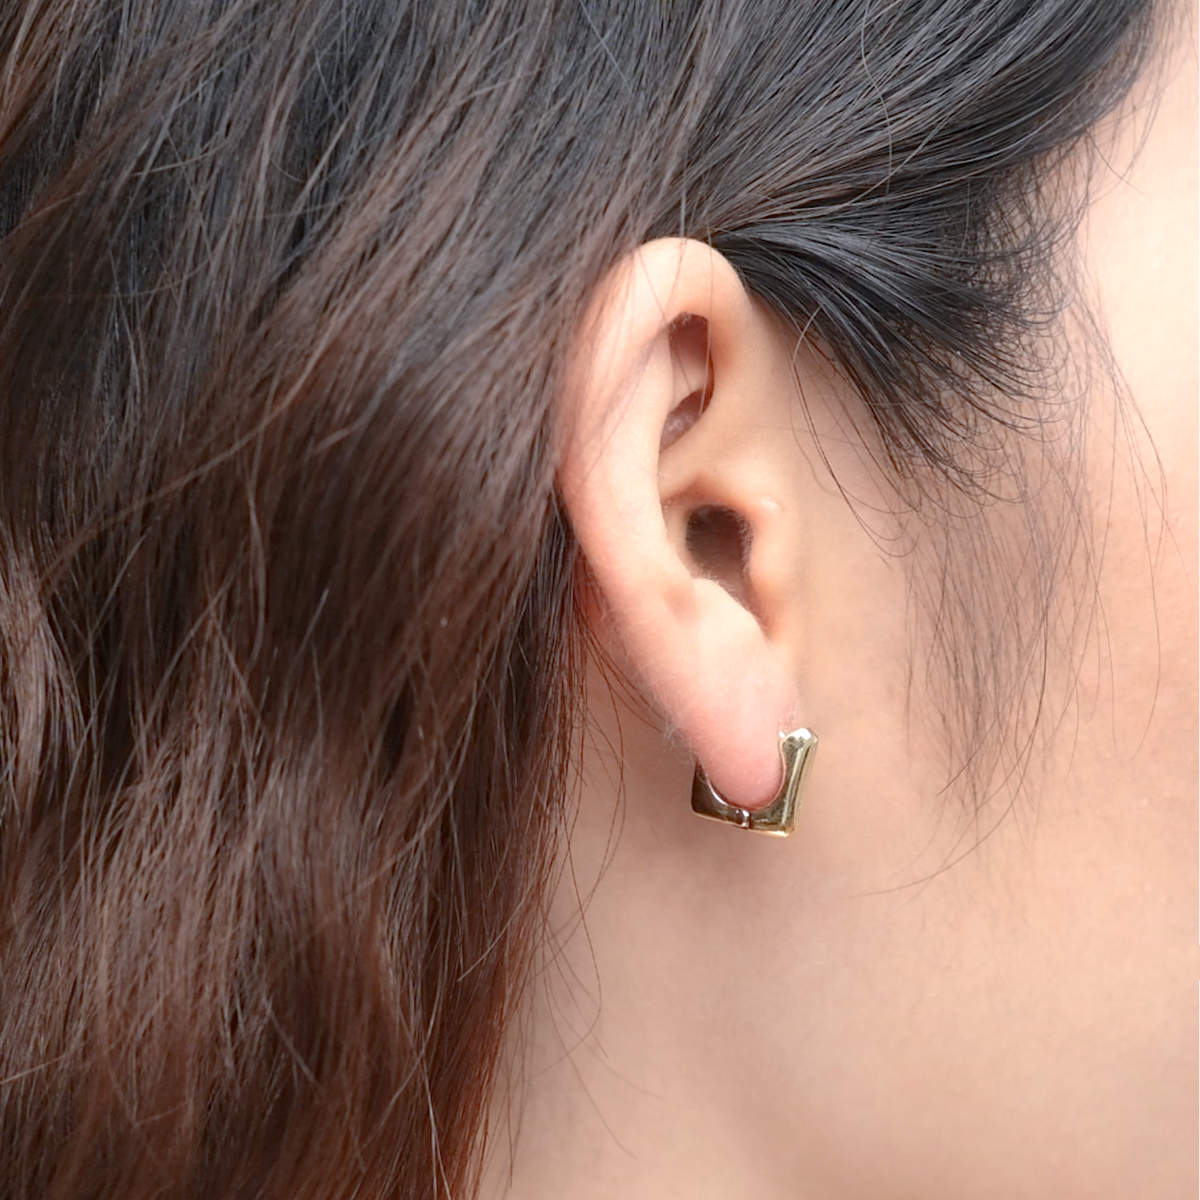 How to Fix Loose Huggie Earring Clasps